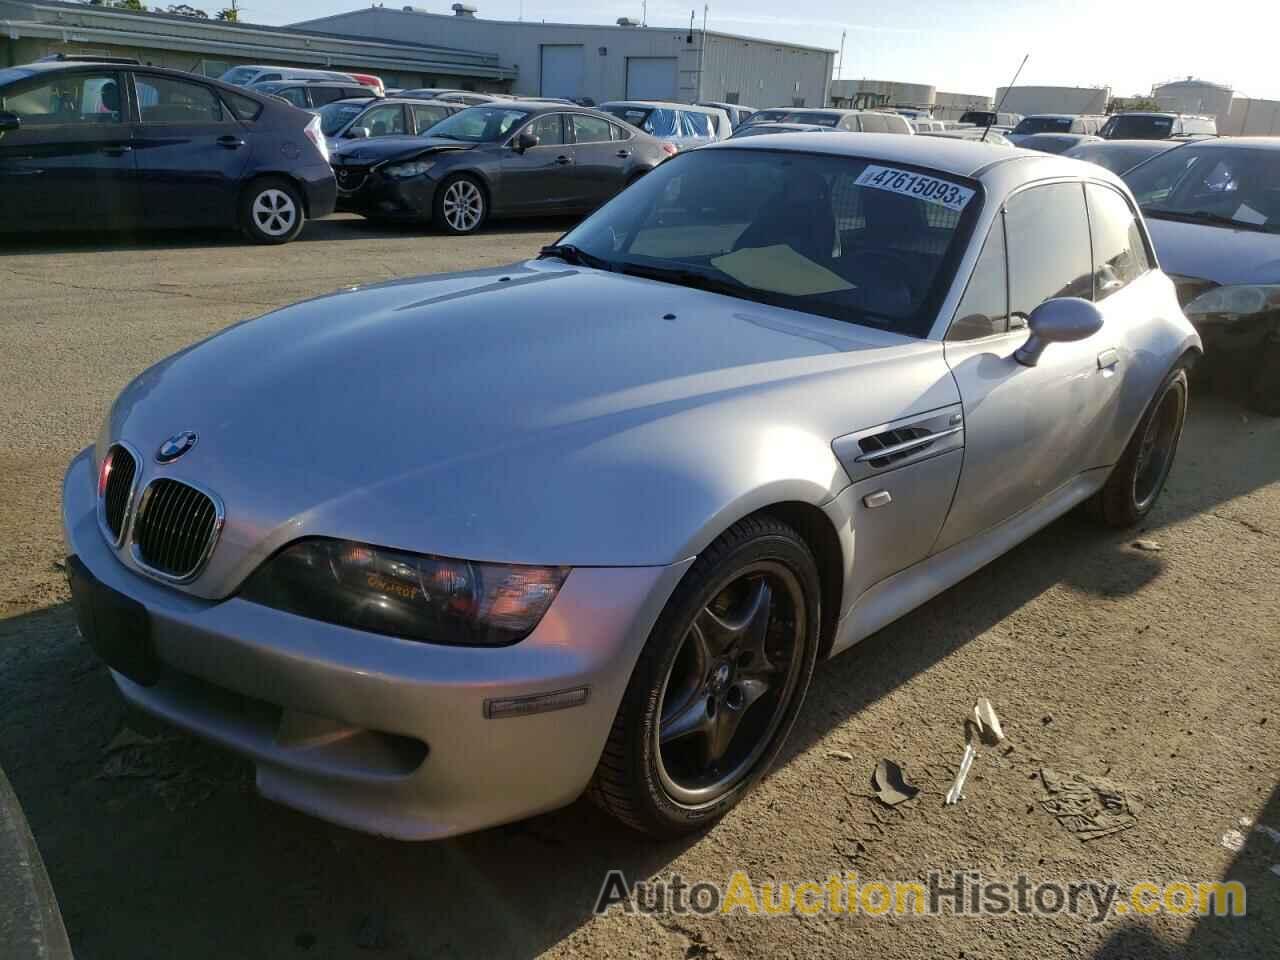 2001 BMW M3 COUPE, WBSCN93451LK60193